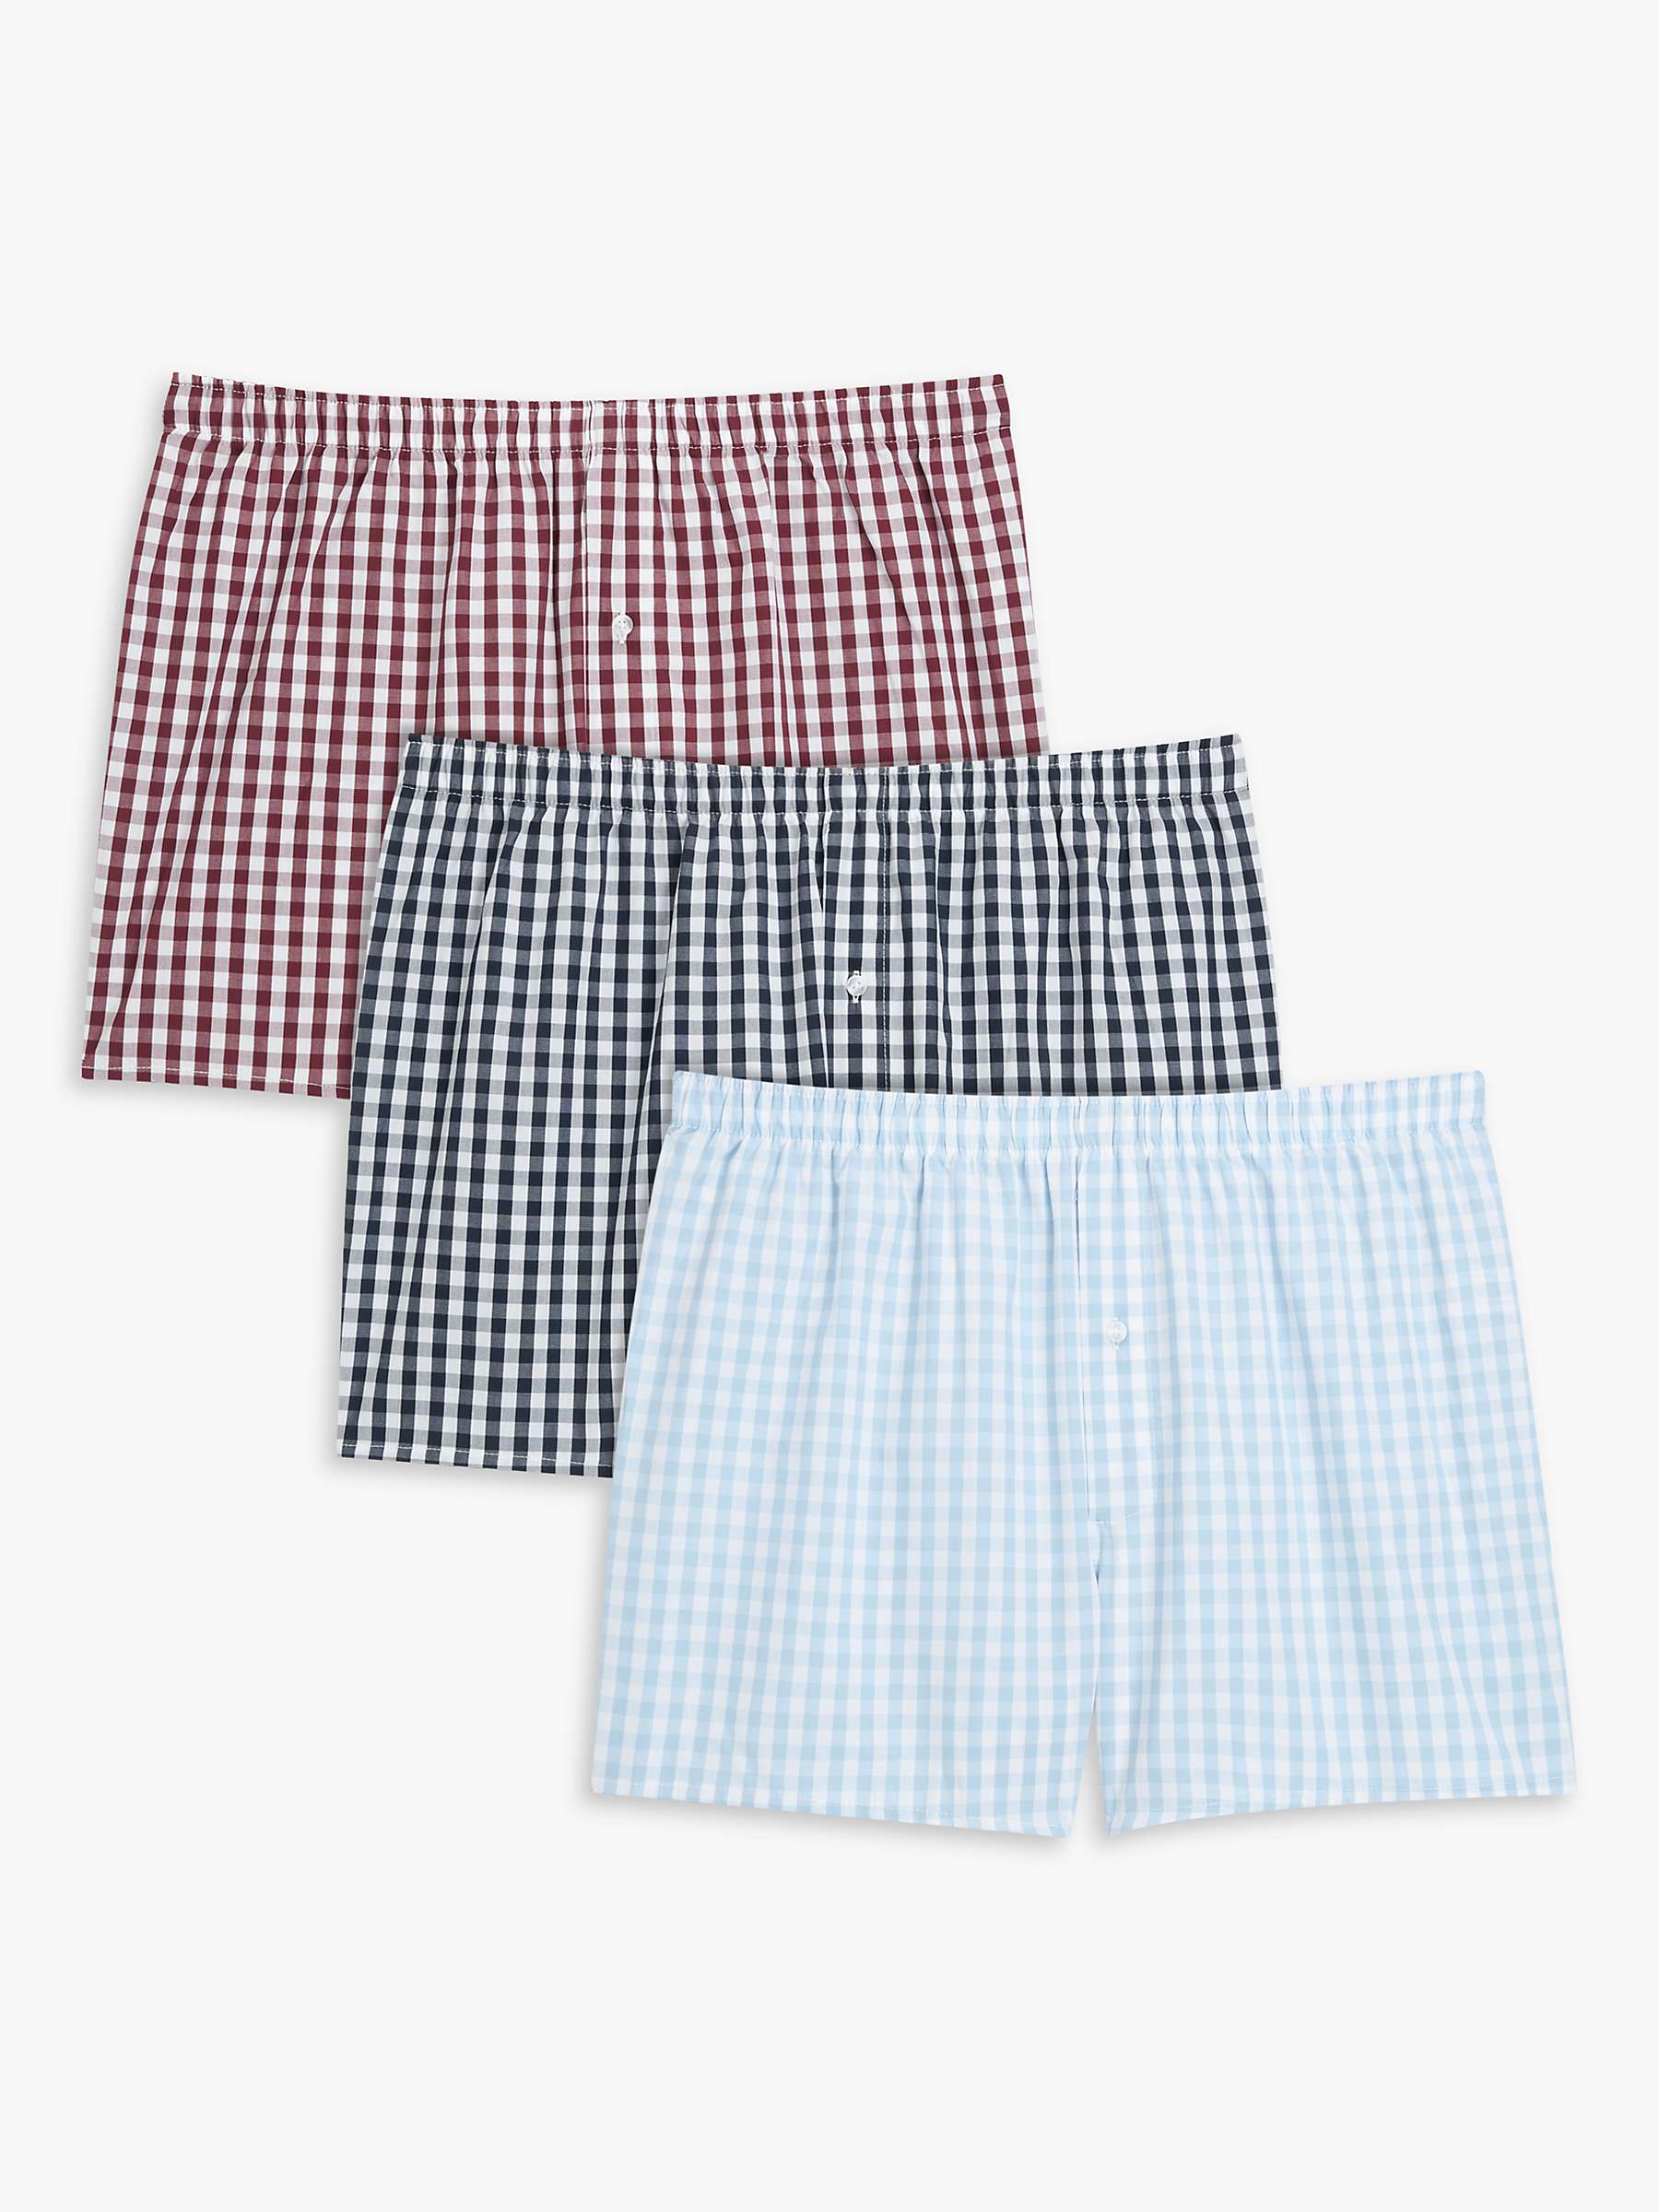 Buy John Lewis Organic Cotton Gingham Check Boxers, Pack of 3, Gingham Online at johnlewis.com